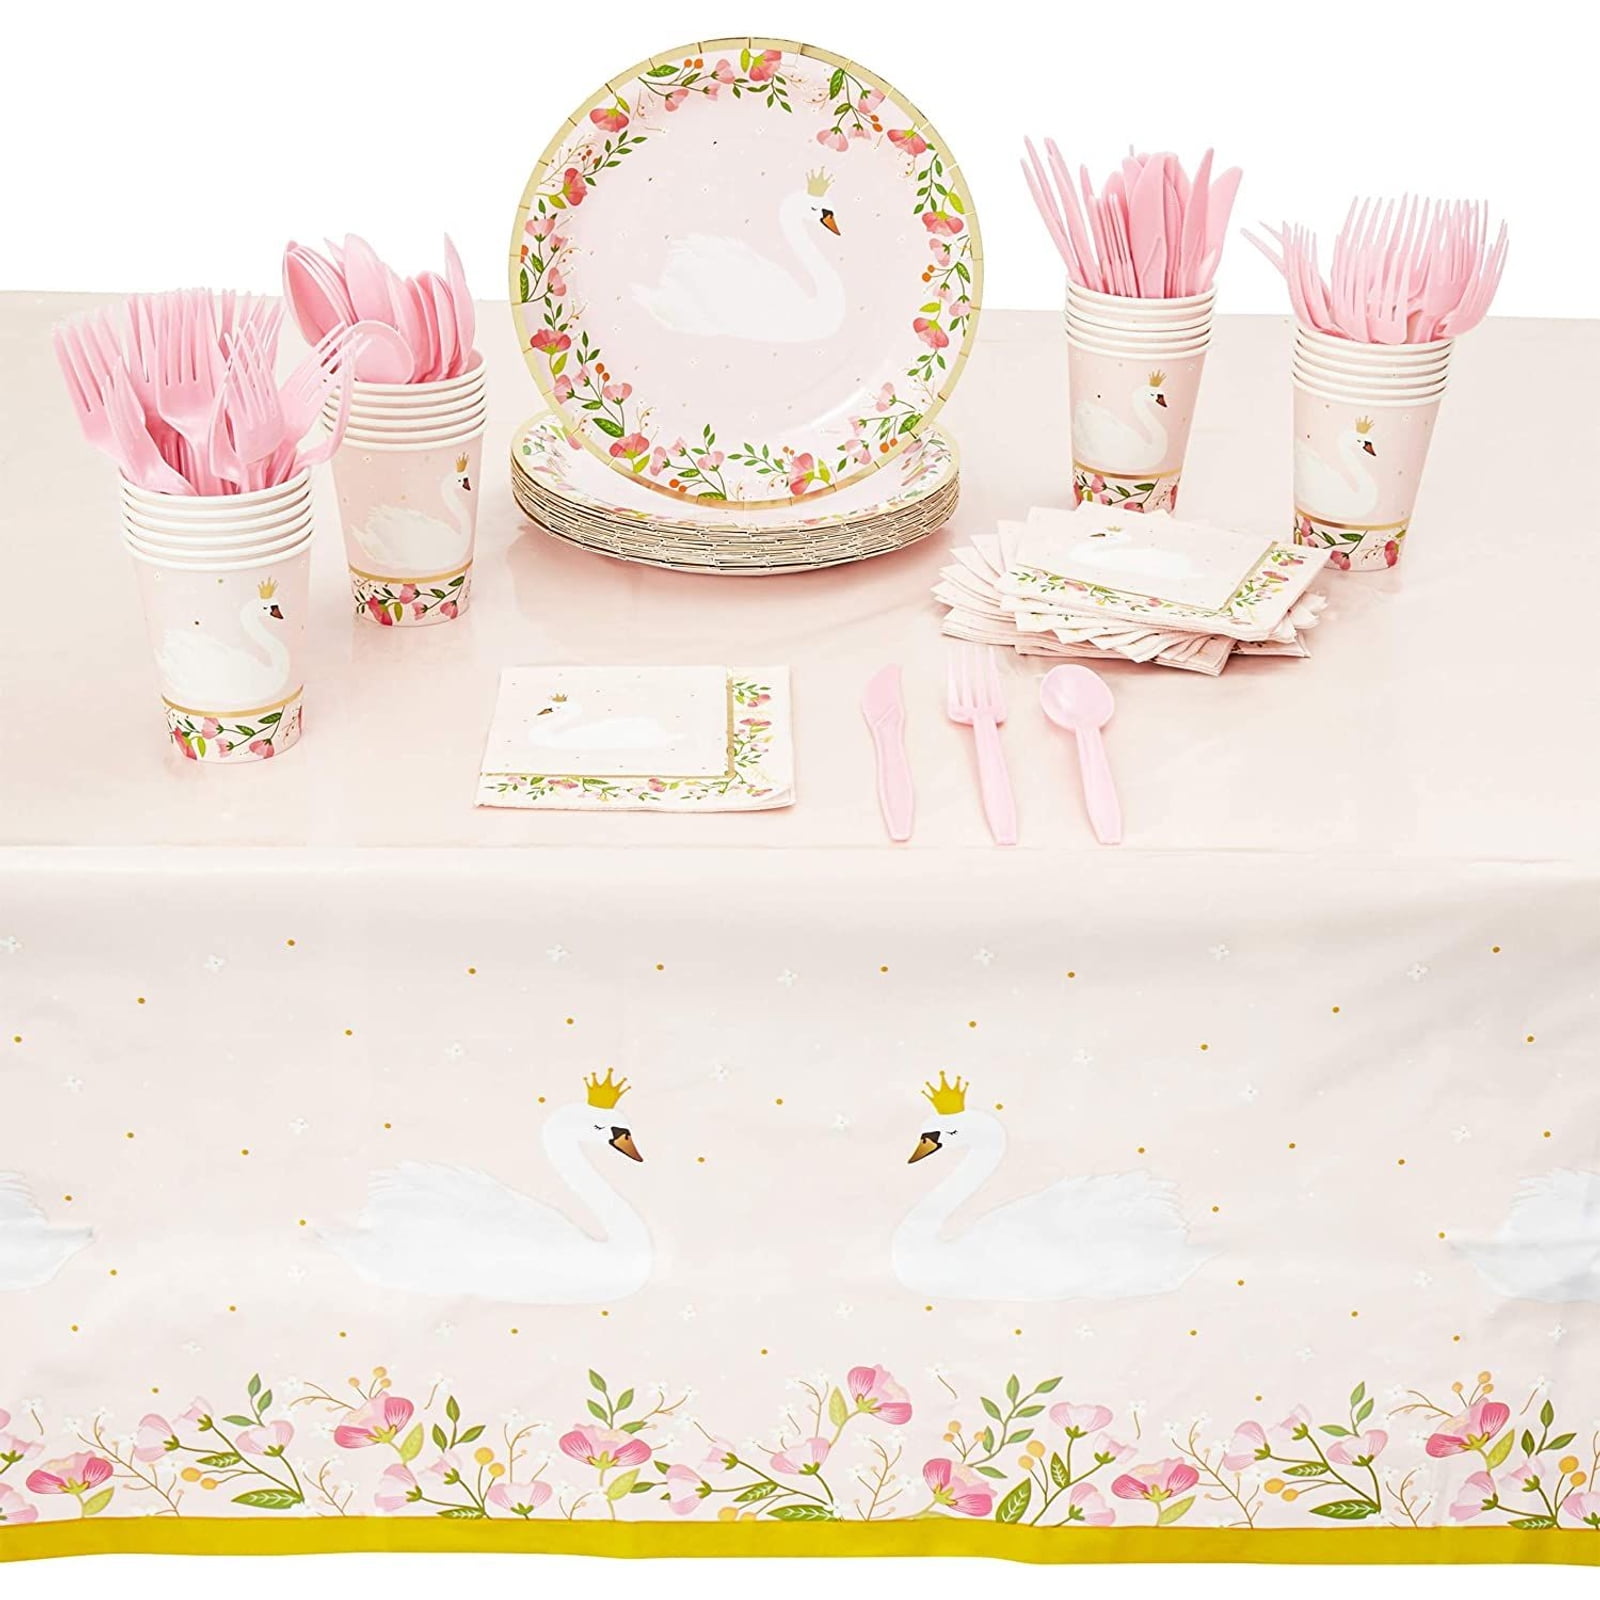 Flamingo Theme Tableware Decor Tablecloth Baby Shower Party Favors Gift Bags